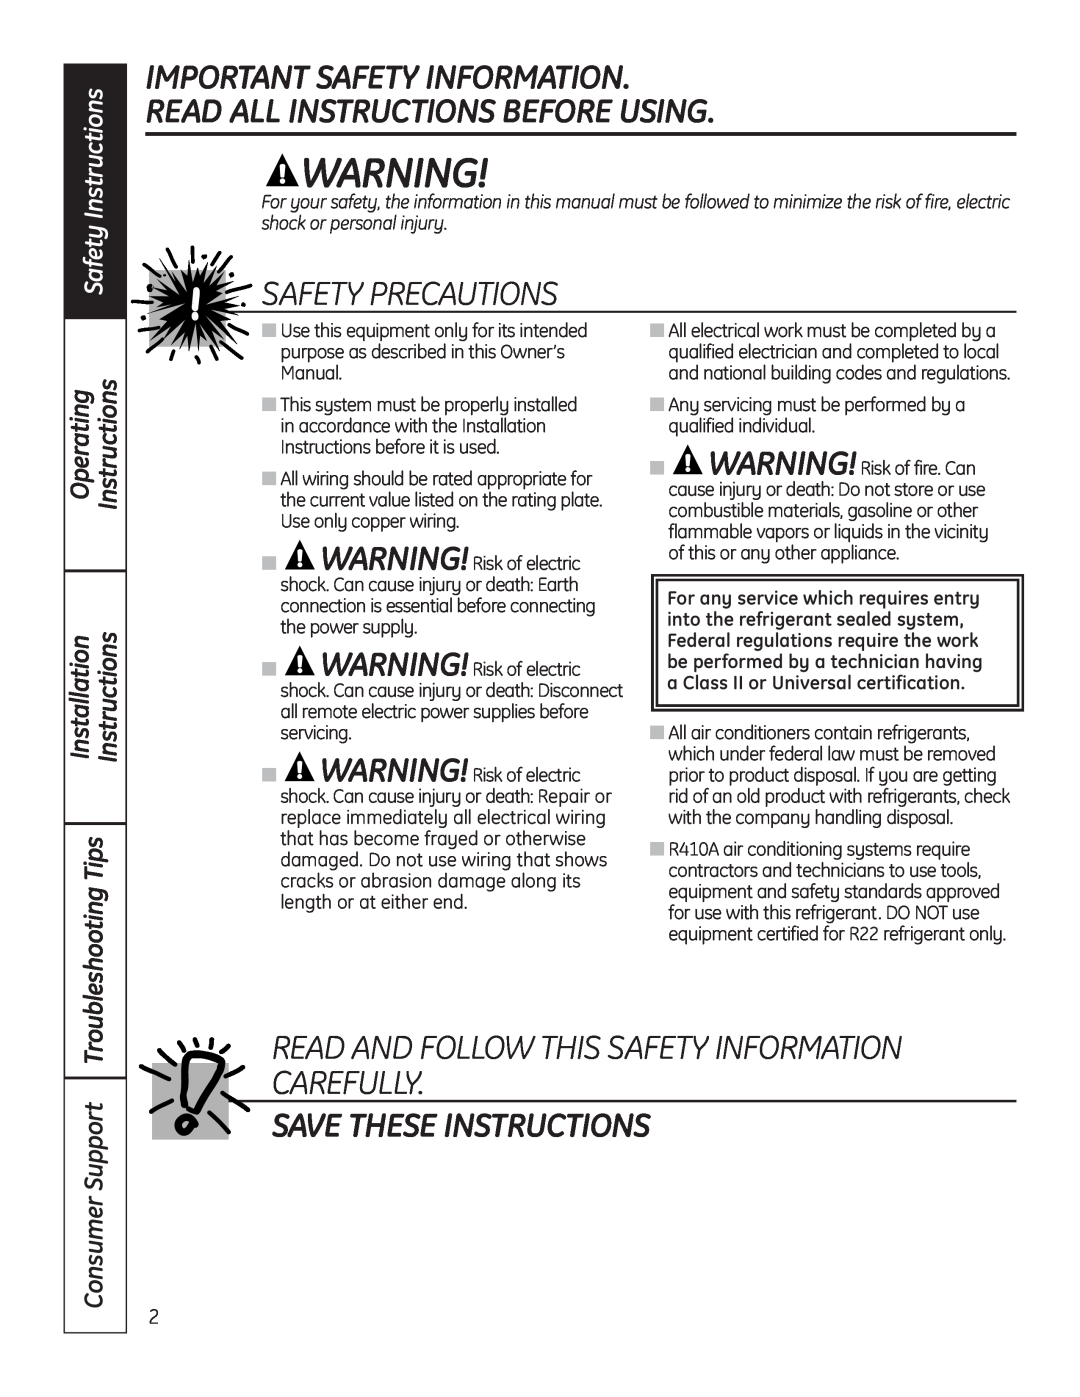 GE AE1CD20DM Important Safety Information, Read All Instructions Before Using, Safety Precautions, Save These Instructions 